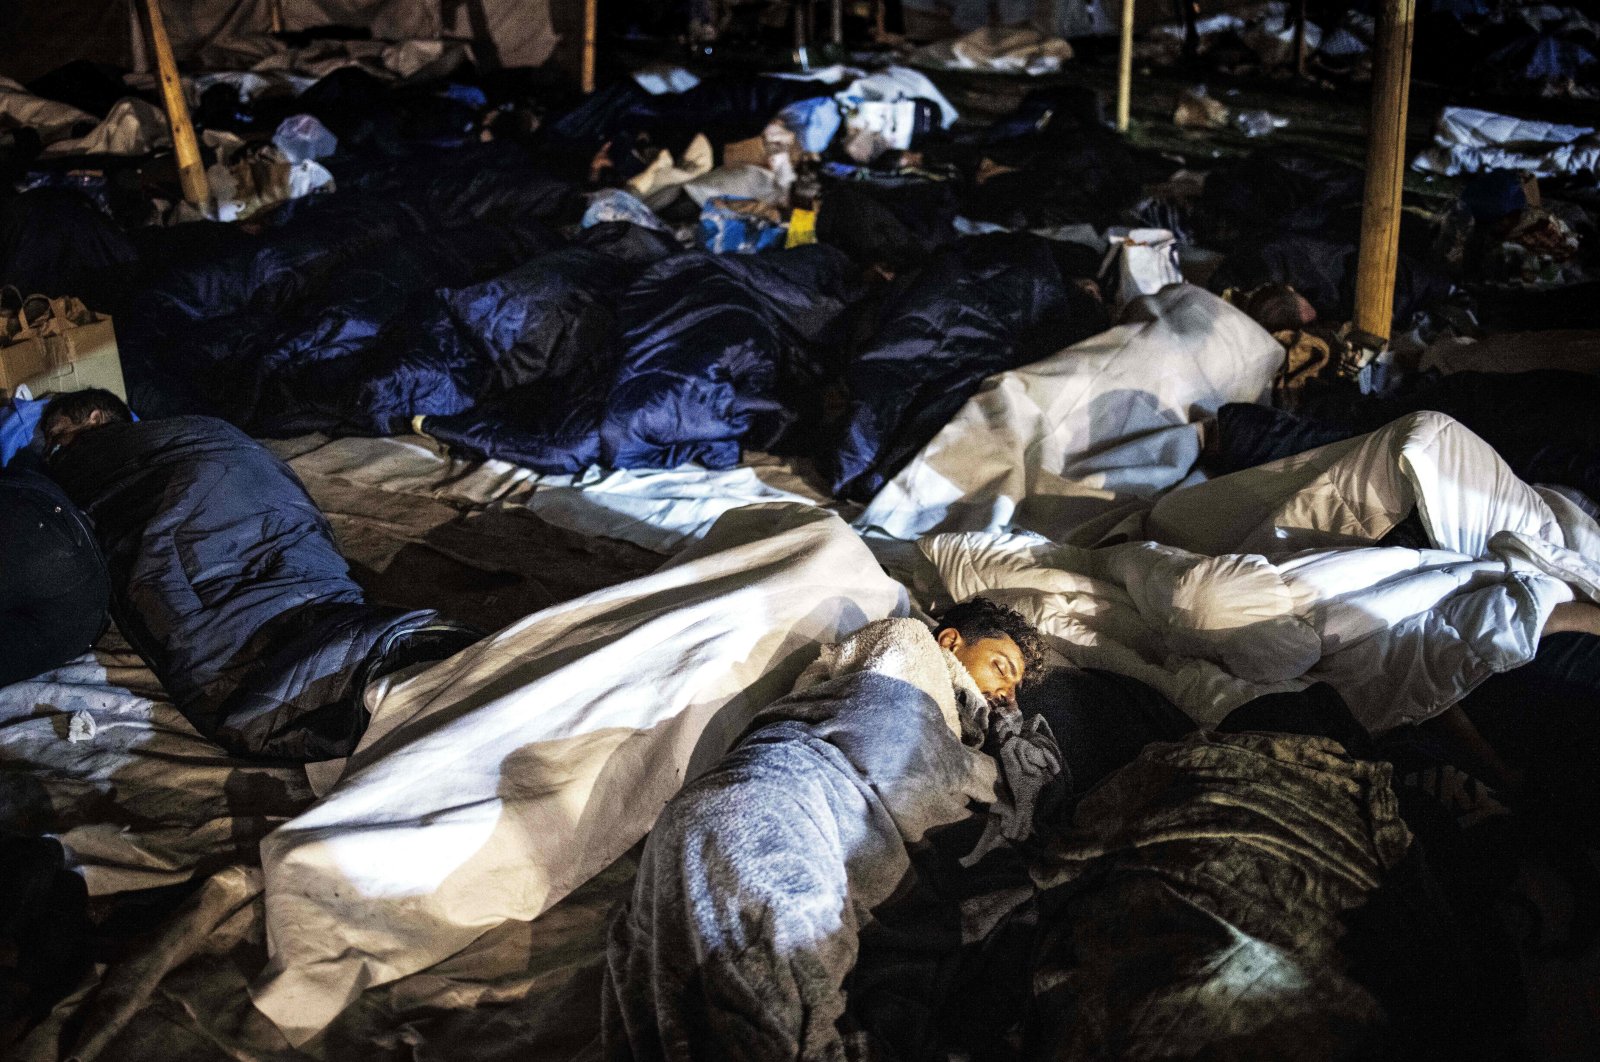 Asylum-seekers sleep on the ground for a third night in a row, outside the registration and application center in Ter Apel, the Netherlands, on Aug. 26, 2022. (AFP Photo)